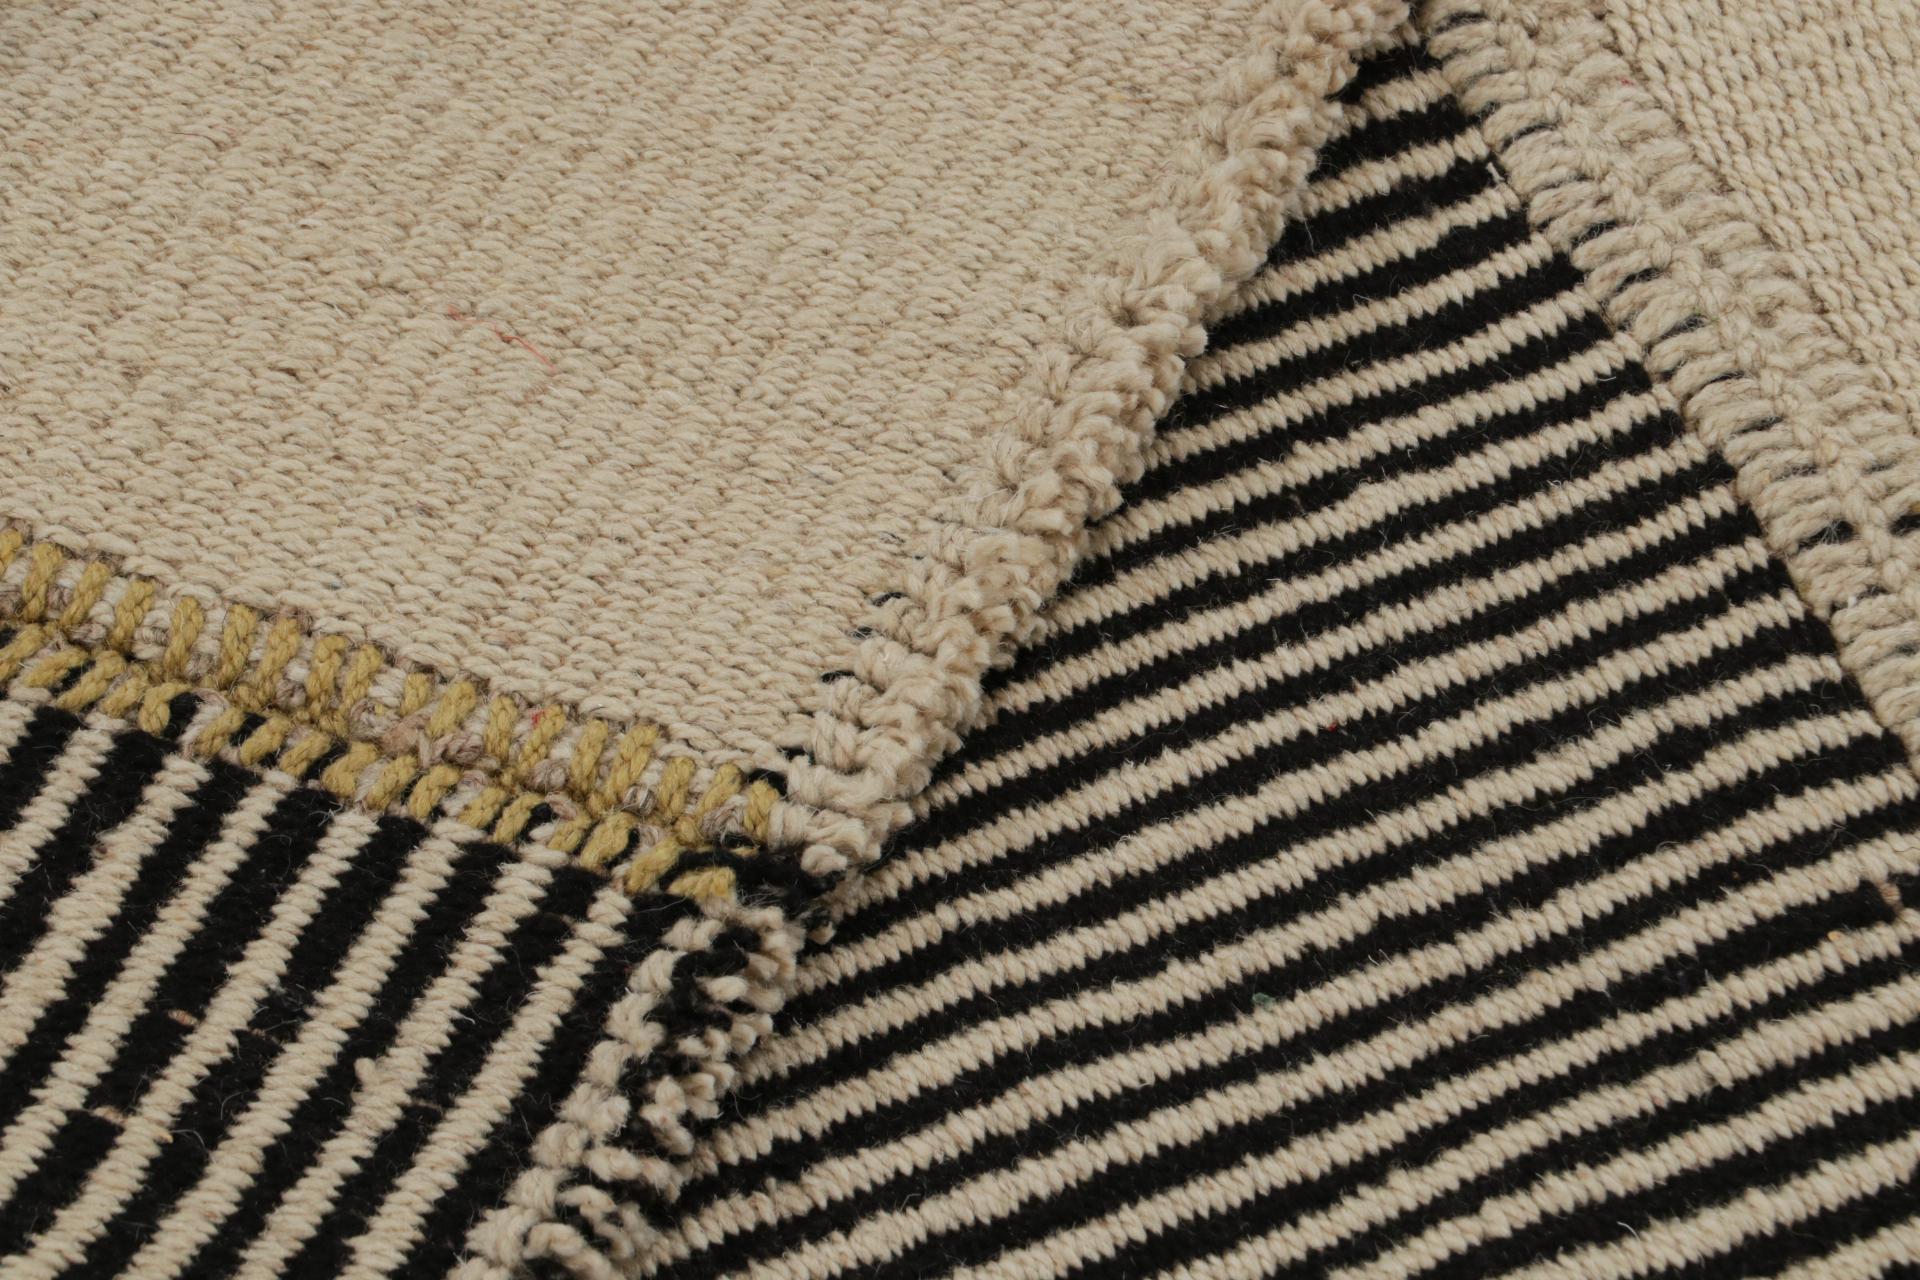 Wool Rug & Kilim’s Contemporary Runner Kilim, In Black And Beige Tones and Stripes For Sale